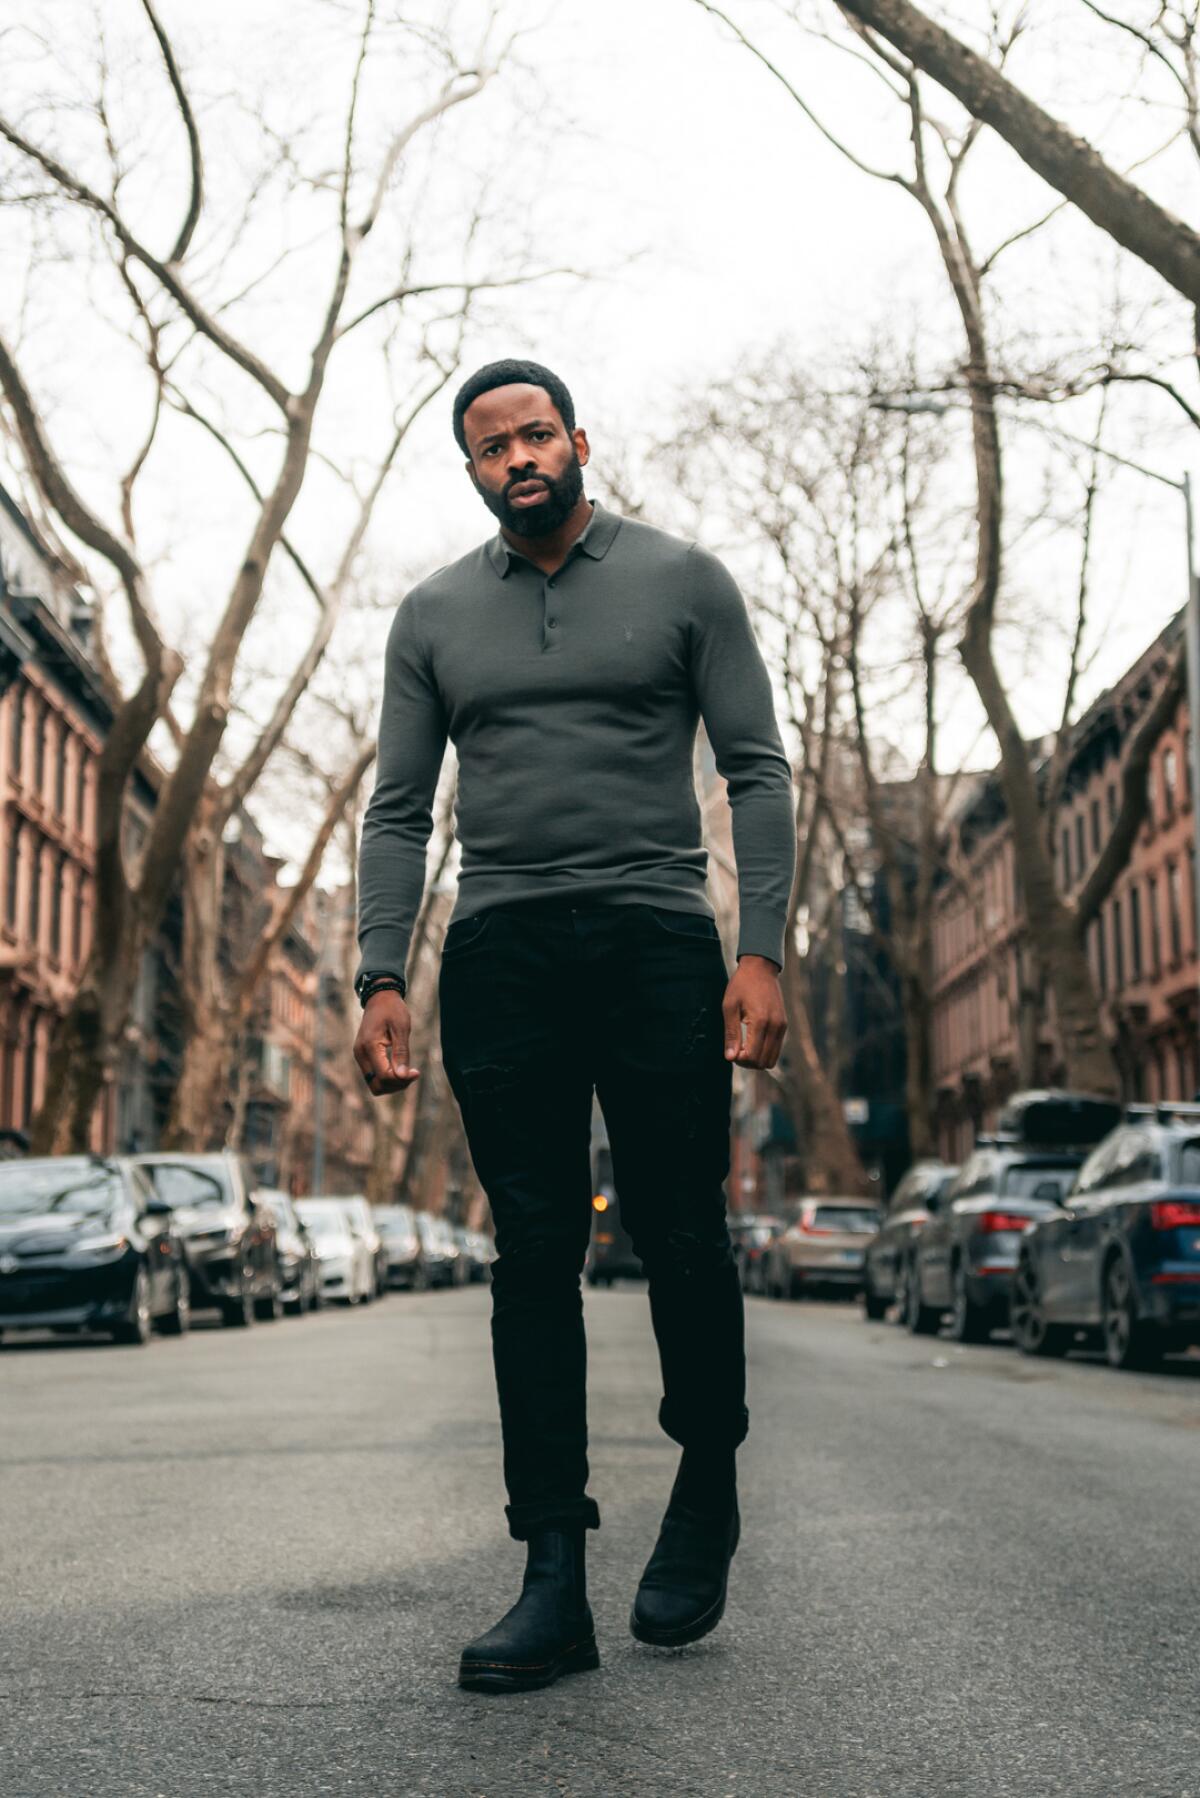 A muscular man stands in the middle of a street on a gray day.